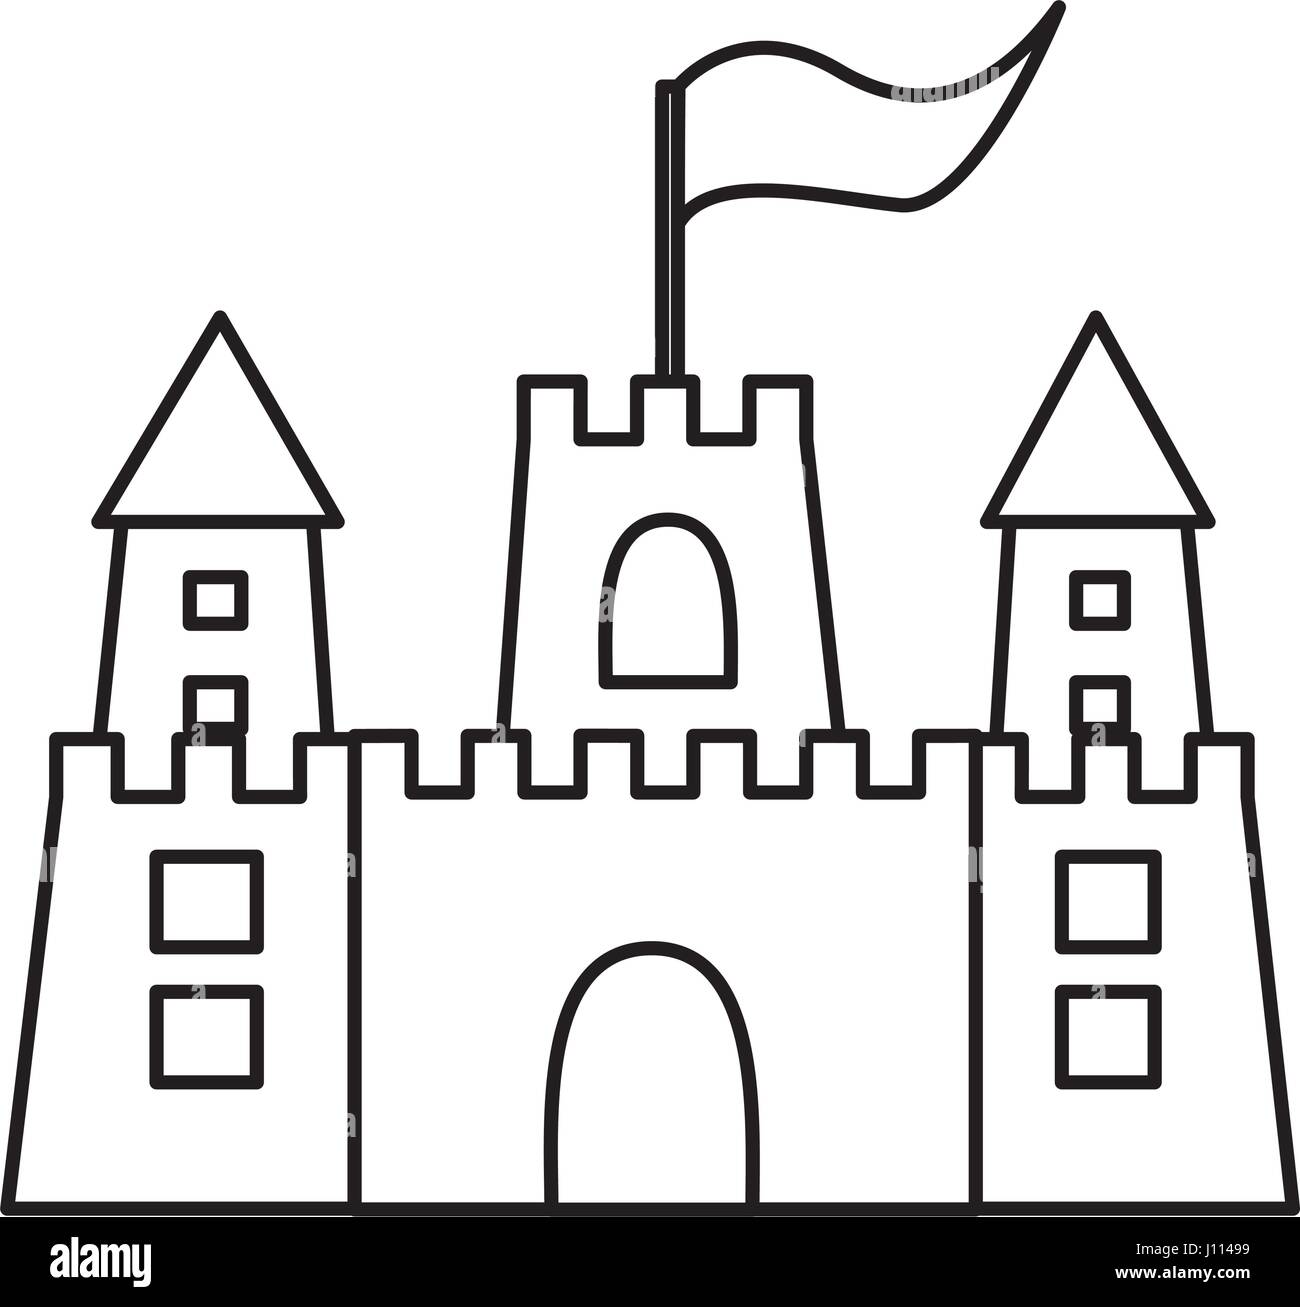 monochrome contour of sandcastle with flag Stock Vector